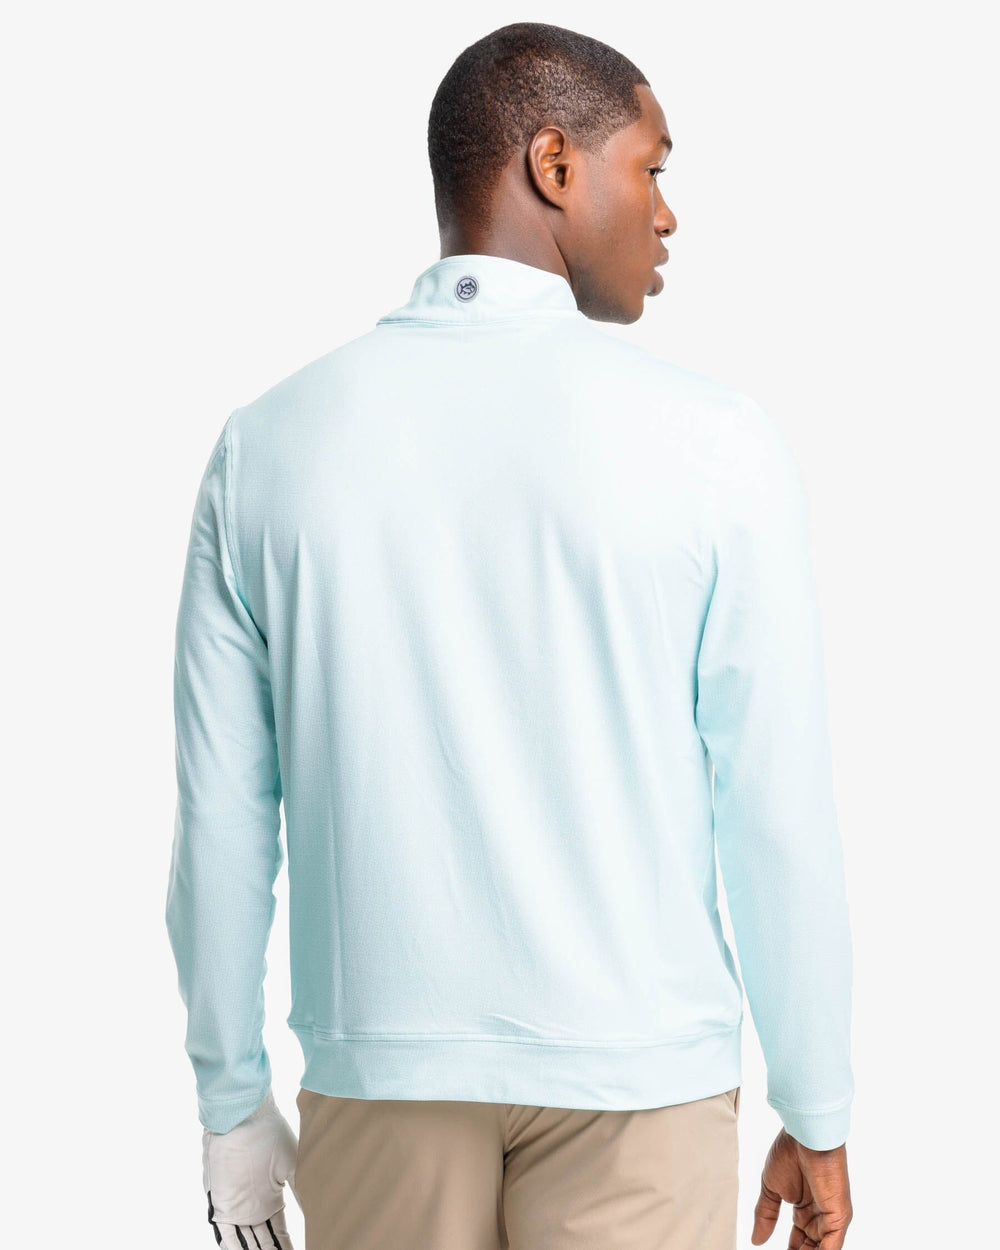 The back view of the Southern Tide Pine Ridge Print Cruiser Quarter Zip Pullover by Southern Tide - Baltic Teal